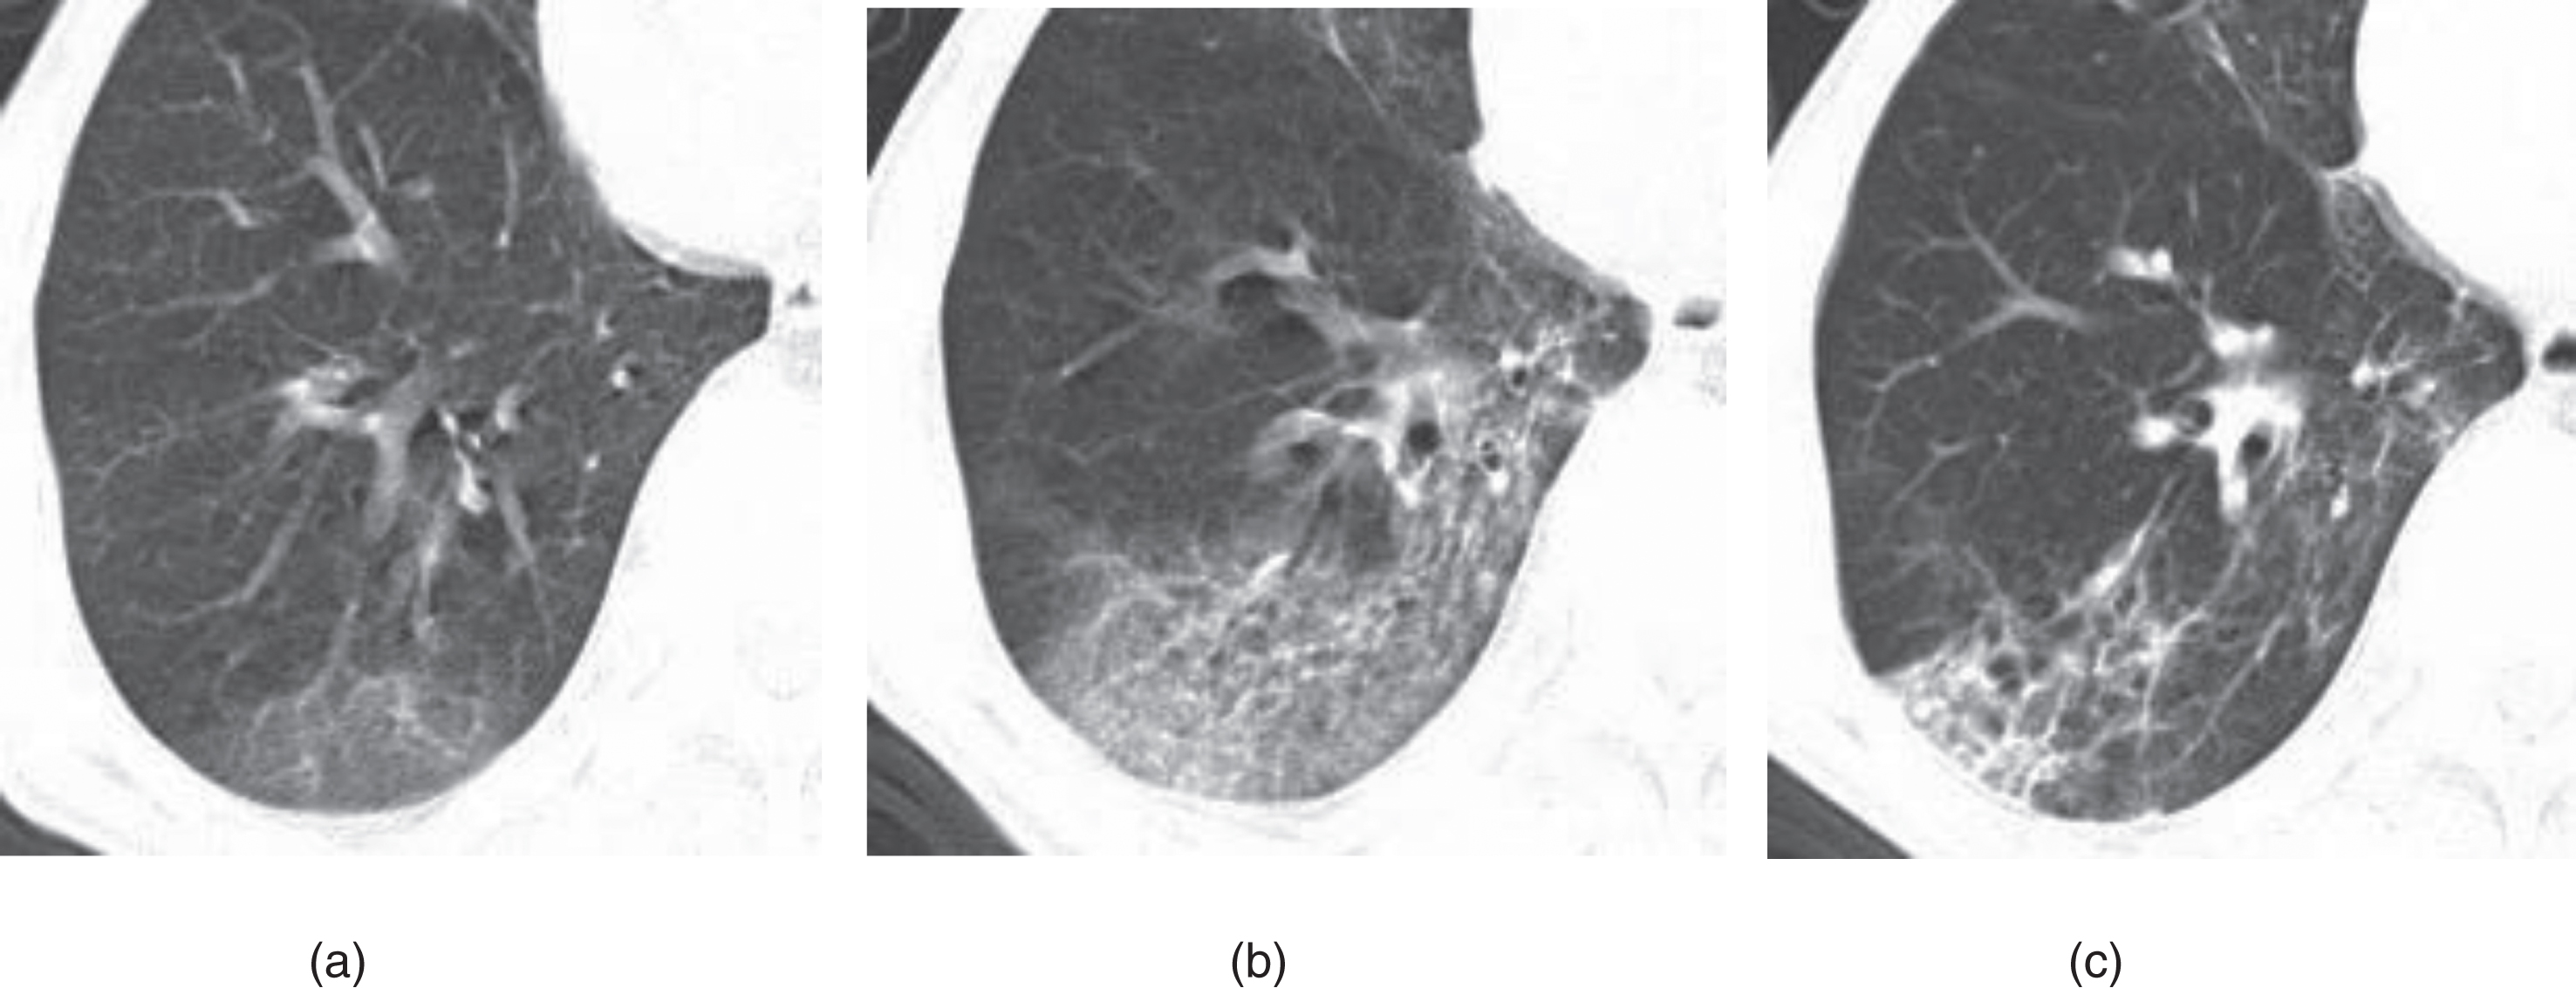 Example of CT image slices of a male COVID-19 patient of 65 years old. (a) CT scan performed 2 days after admission. Images show ground-glass opacity (GGO) in the posterior basal segment of the right lower lobe, with the lesion located subpleural region. (b) CT images obtained 10 days after admission. Lesions Increased with higher density and thickening of the interlobular septum. (c) Follow-up CT scan (obtained at day 36 after admission and 18 days after discharge) shows visible parenchymal bands, irregular interface, and traction bronchiectasis, which indicates fibrosis. The patient was enrolled in group A.